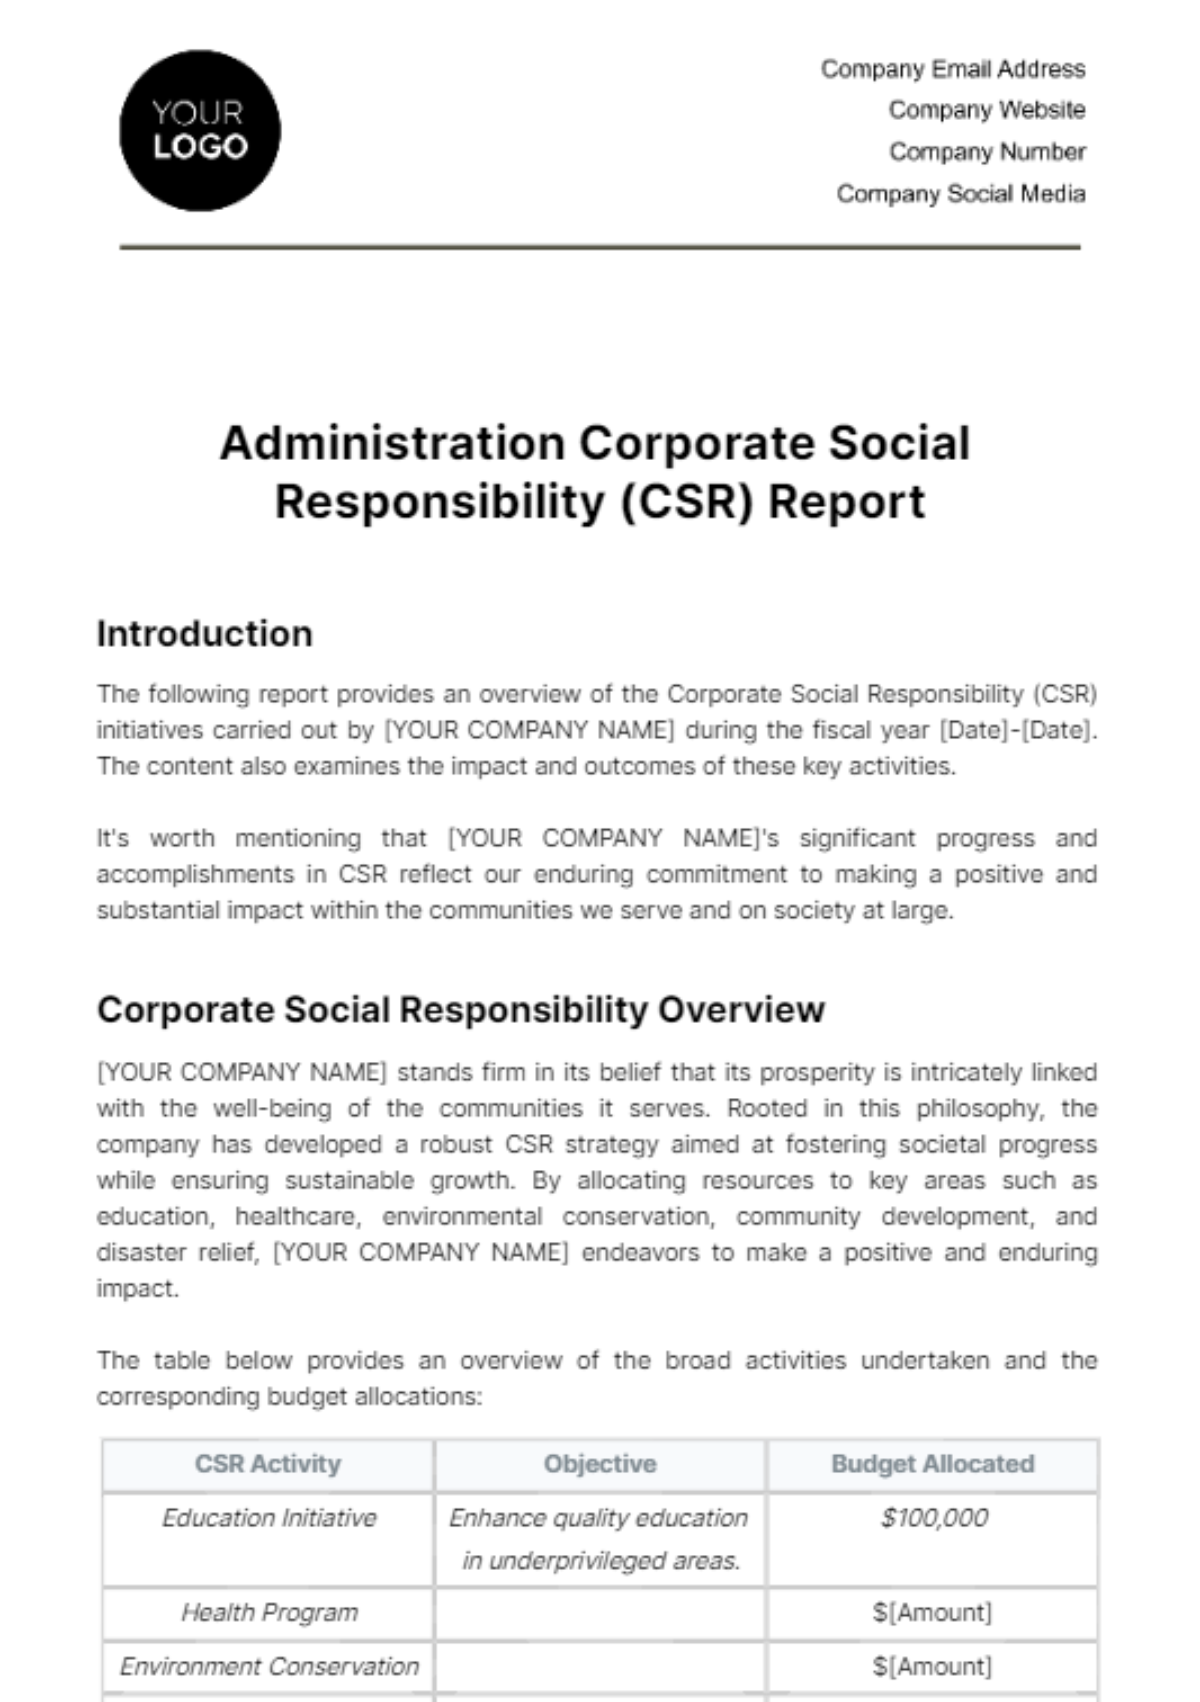 Administration Corporate Social Responsibility (CSR) Report Template